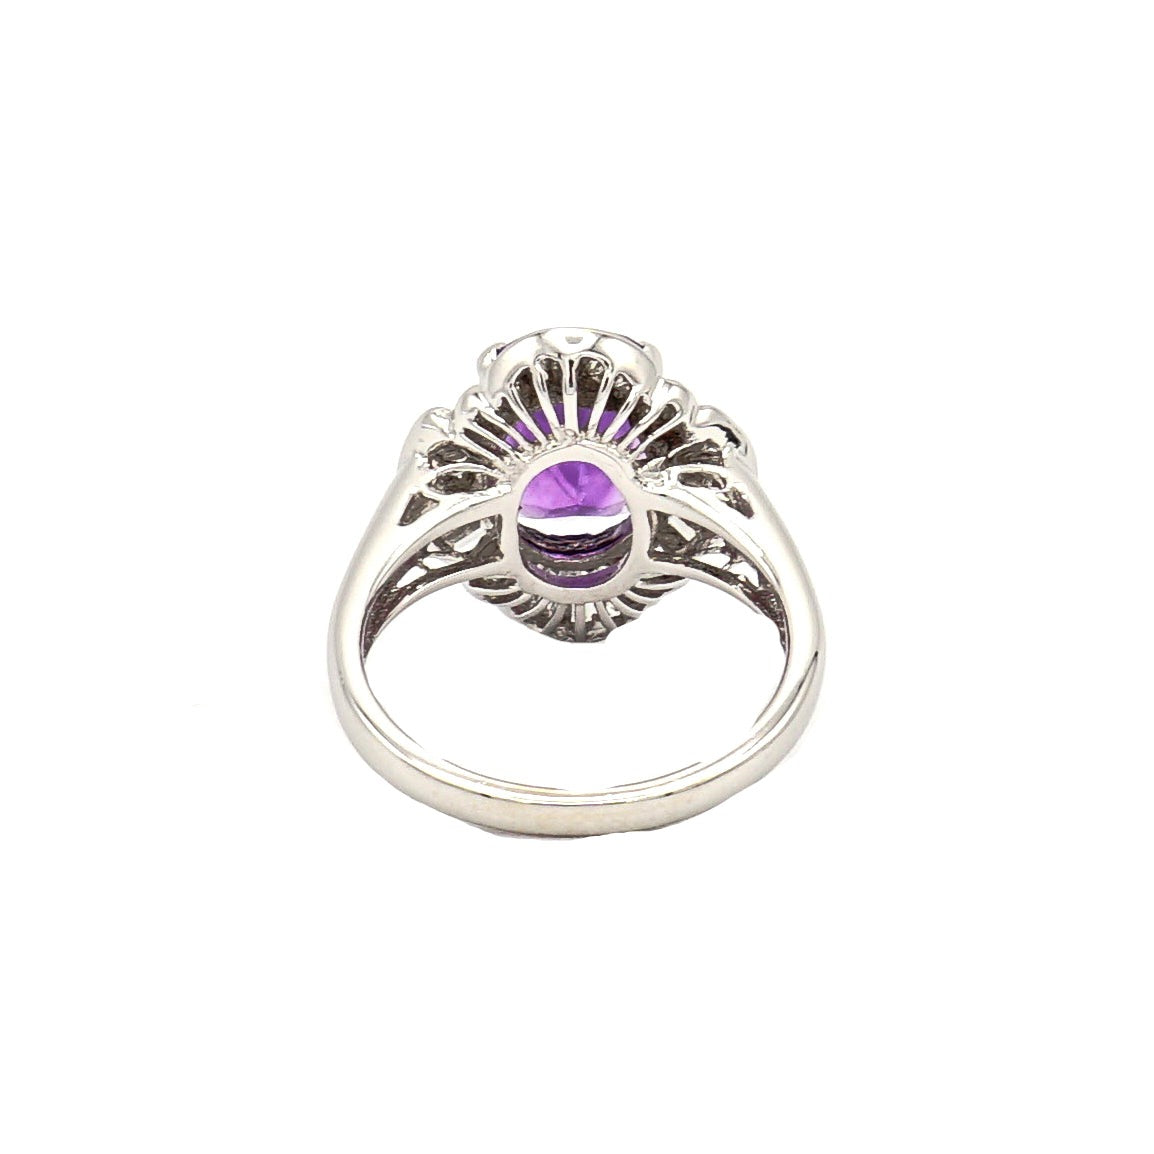 14k White Gold Amethyst and Diamond Ring - Le Vive Jewelry in Riverside